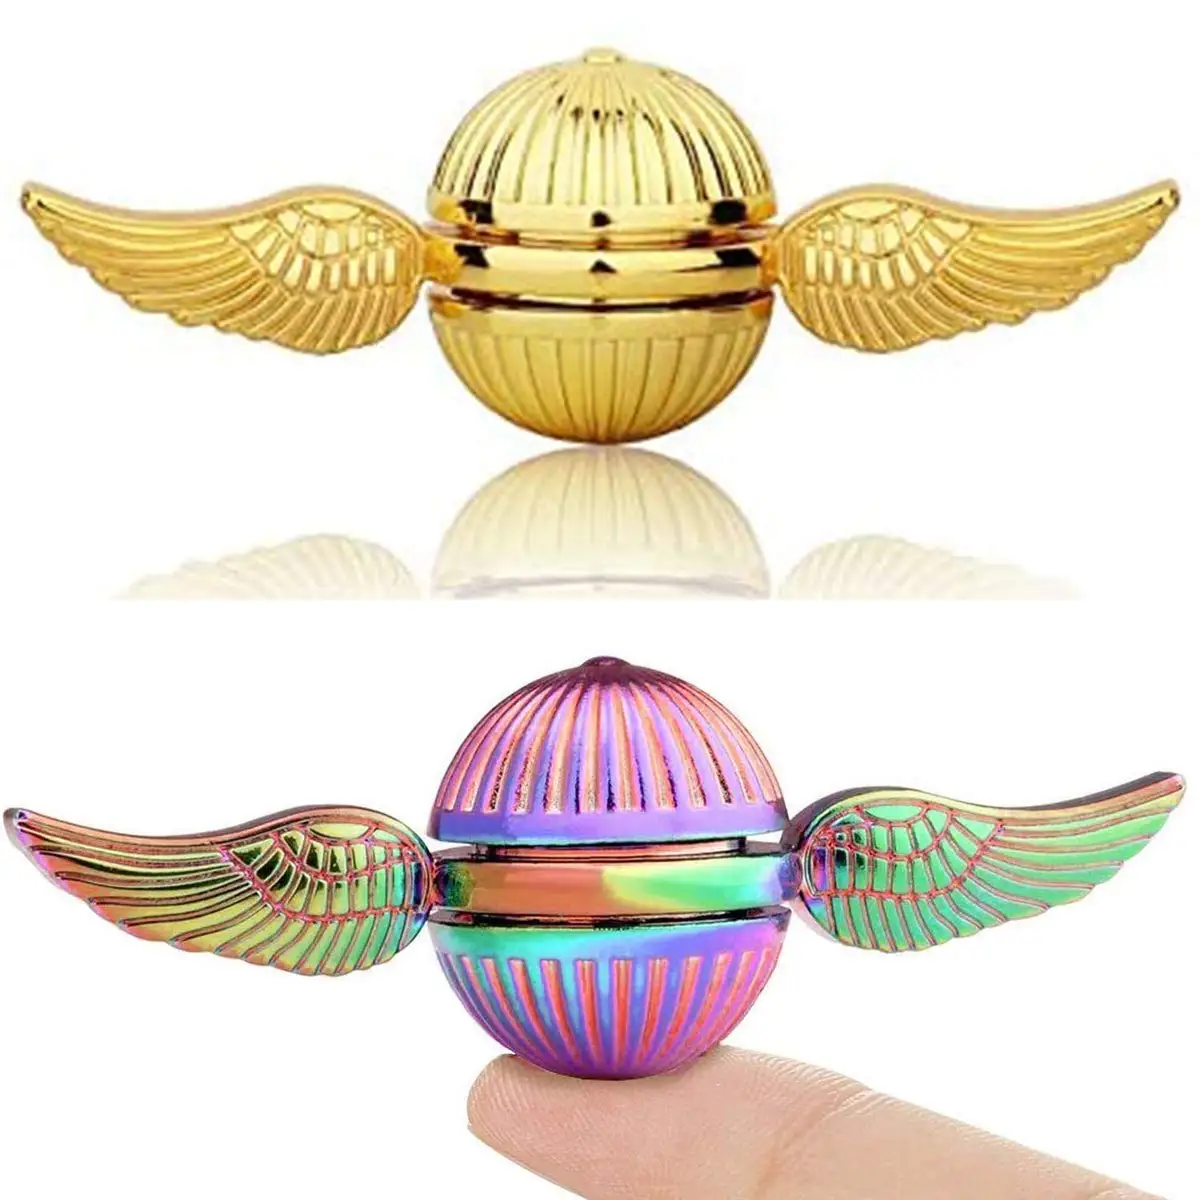 

New Free Shipping Gifts Snitch Fidget Spinner Anti-Stress Fidget Toy Finger Dynamic Changing Gyro Stress Anxiety ADHD Relief Toy